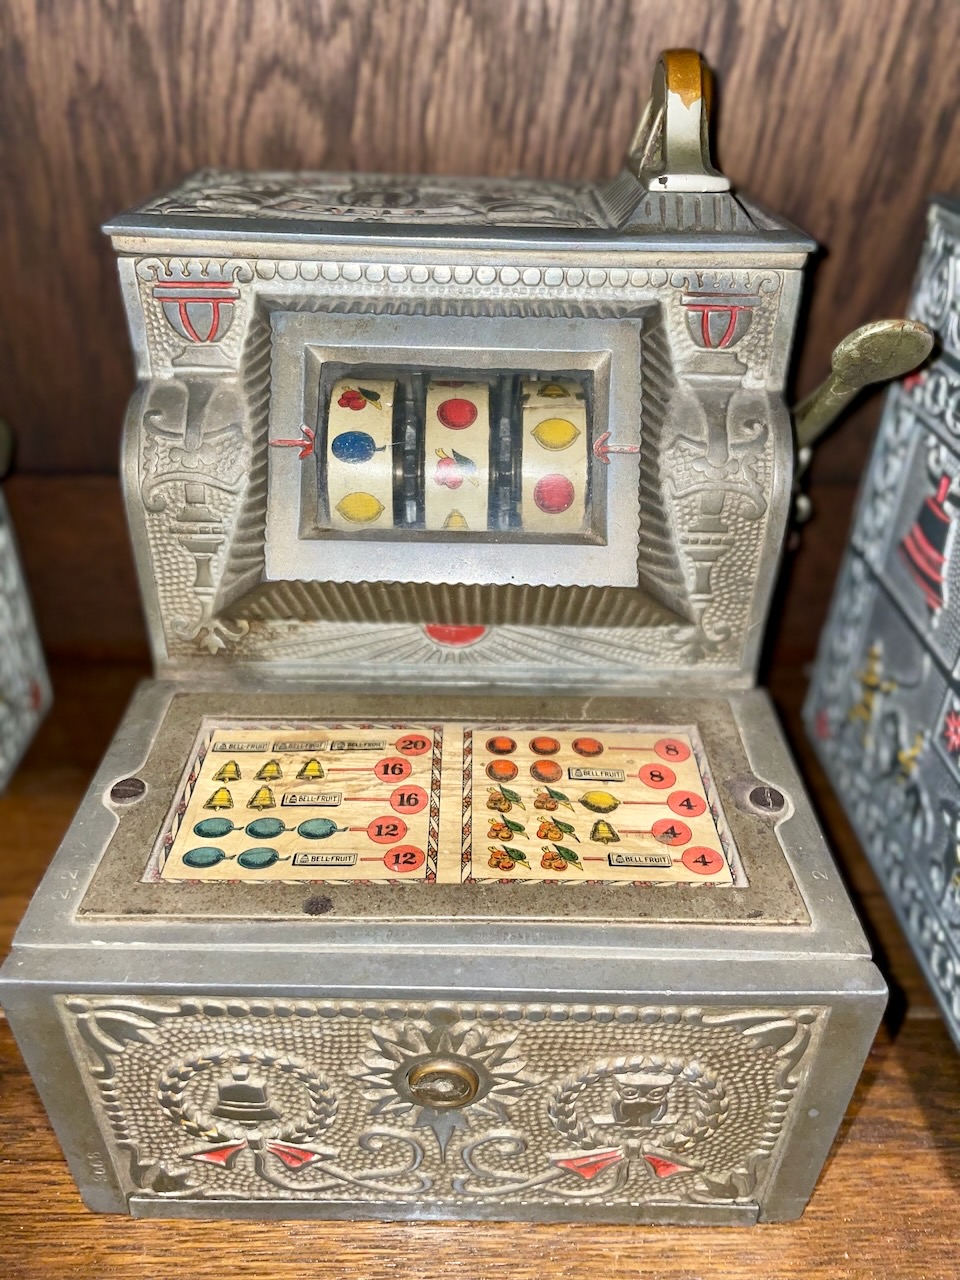 puritan bell slot machines for sale